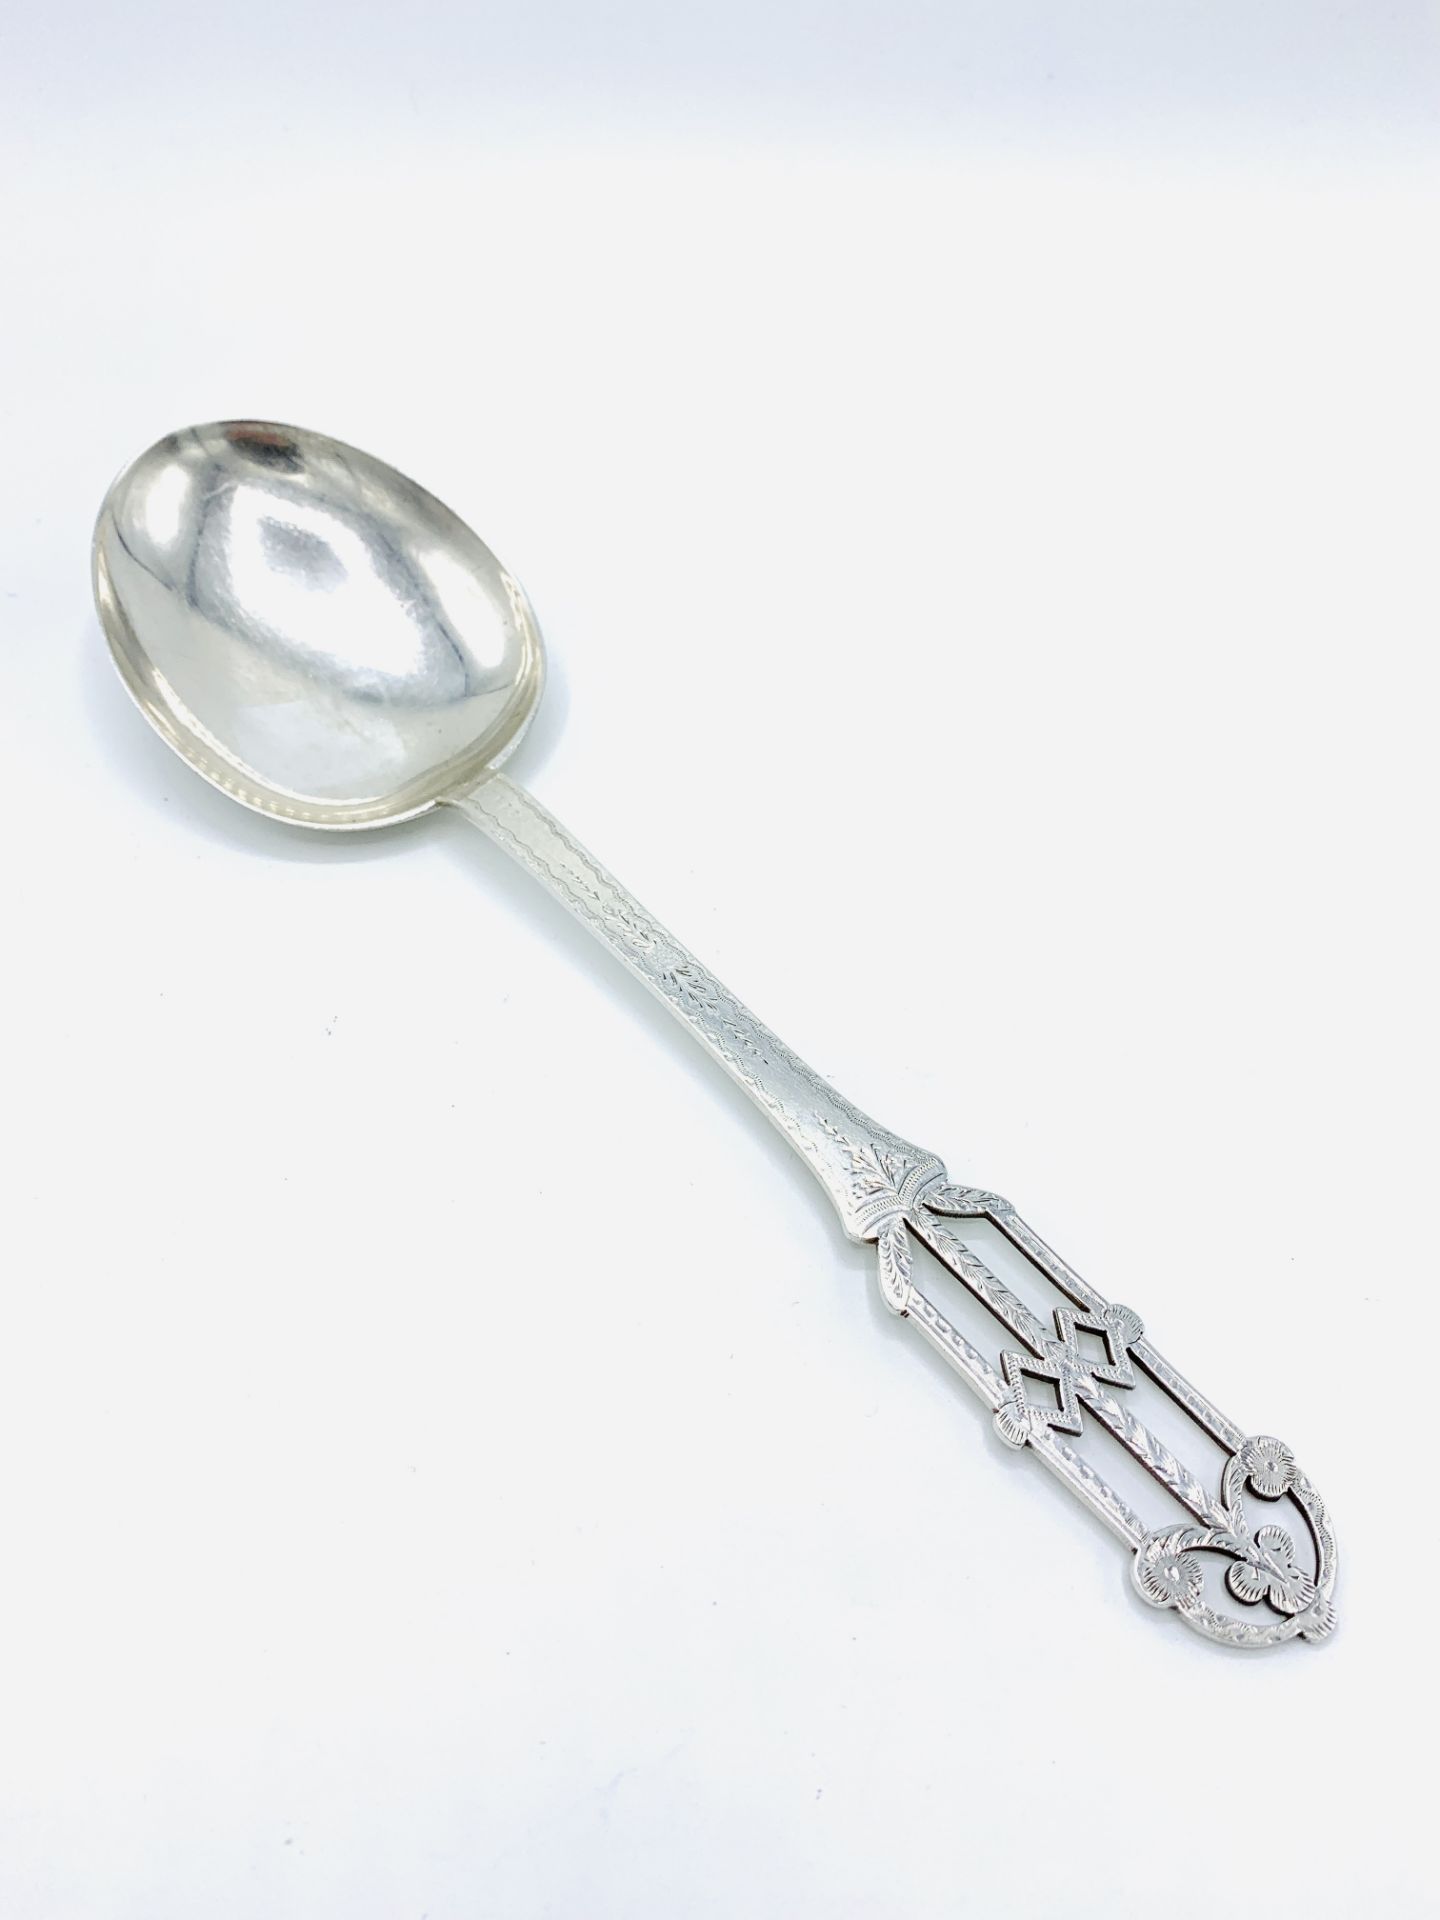 Hand pierced and engraved arts and crafts serving spoon.